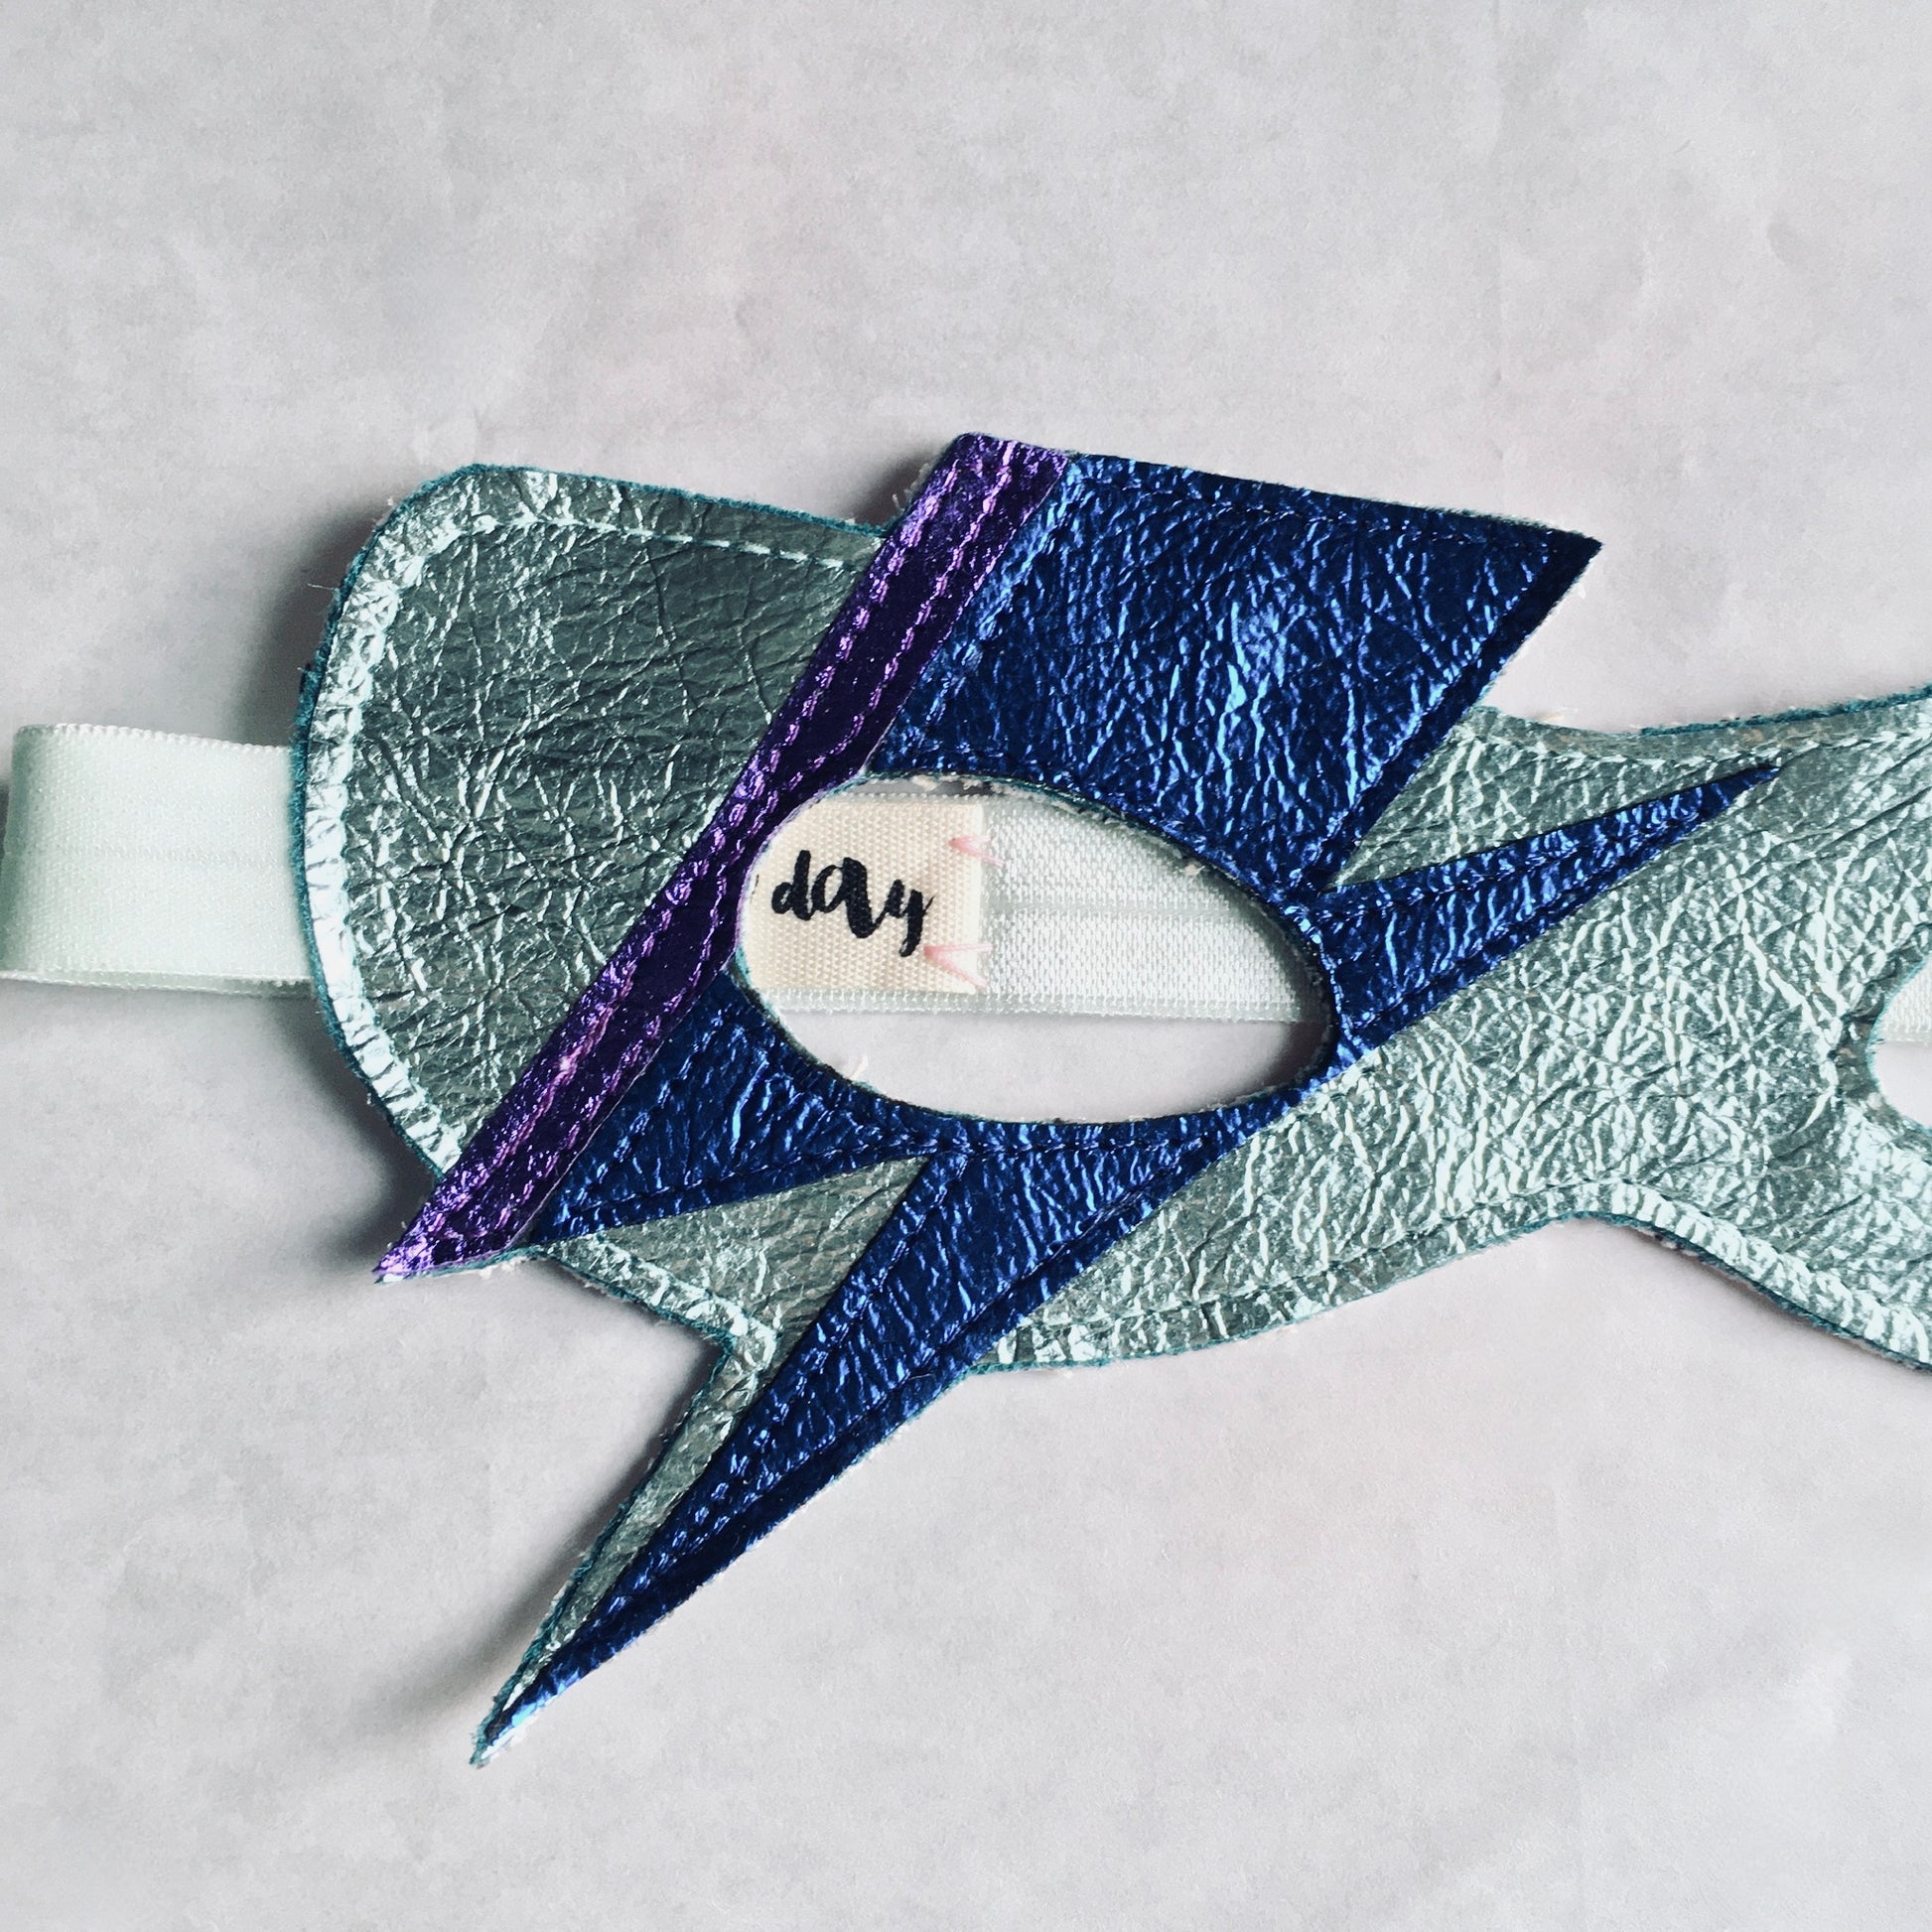 ice, blue, purple - Metallic leather Bowie superhero mask by For Just ONE Day